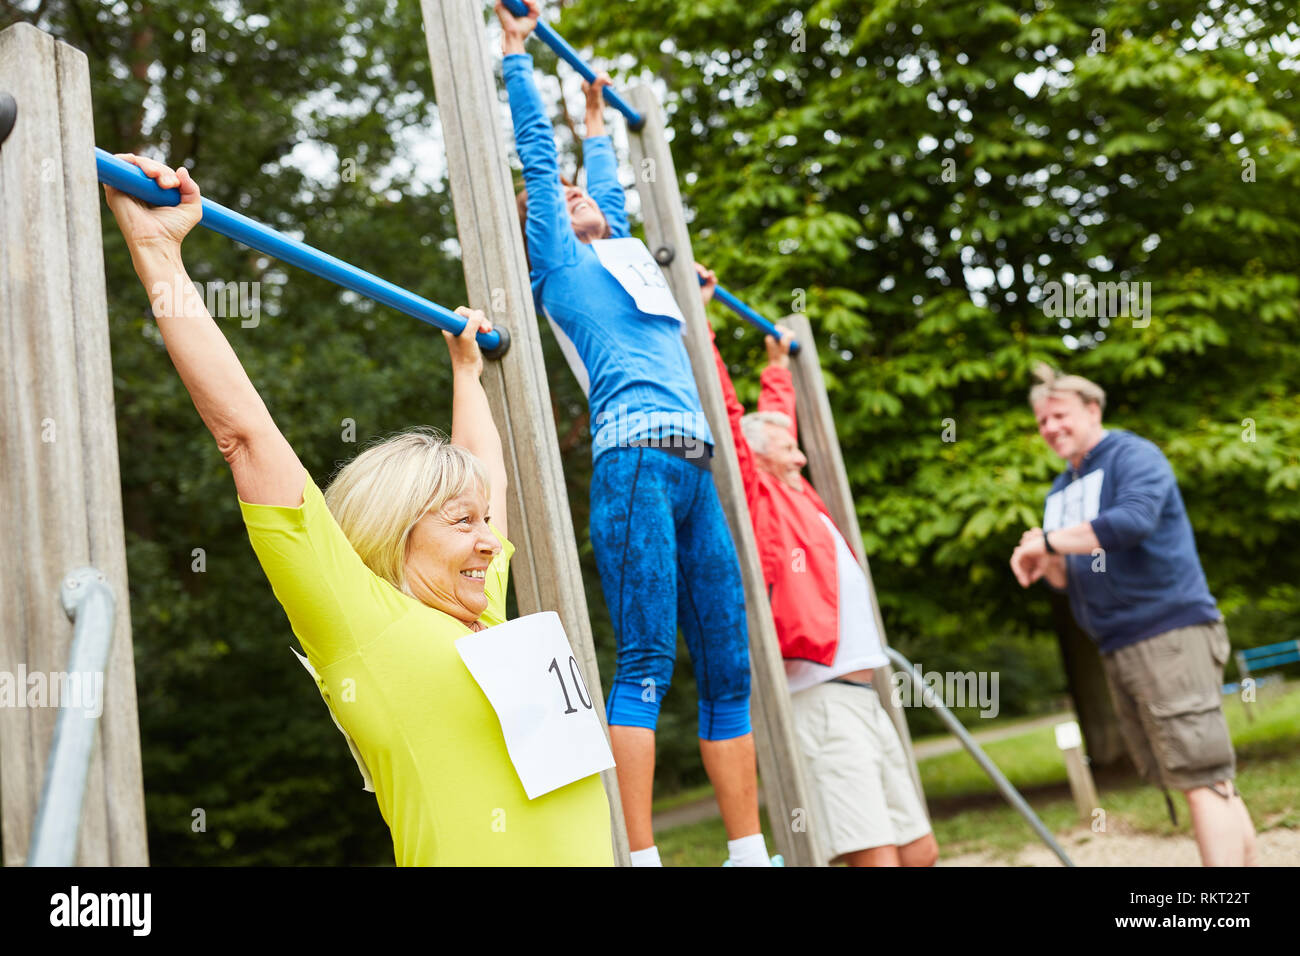 Vital seniors group on the trim you parcours during the pull-up competition Stock Photo